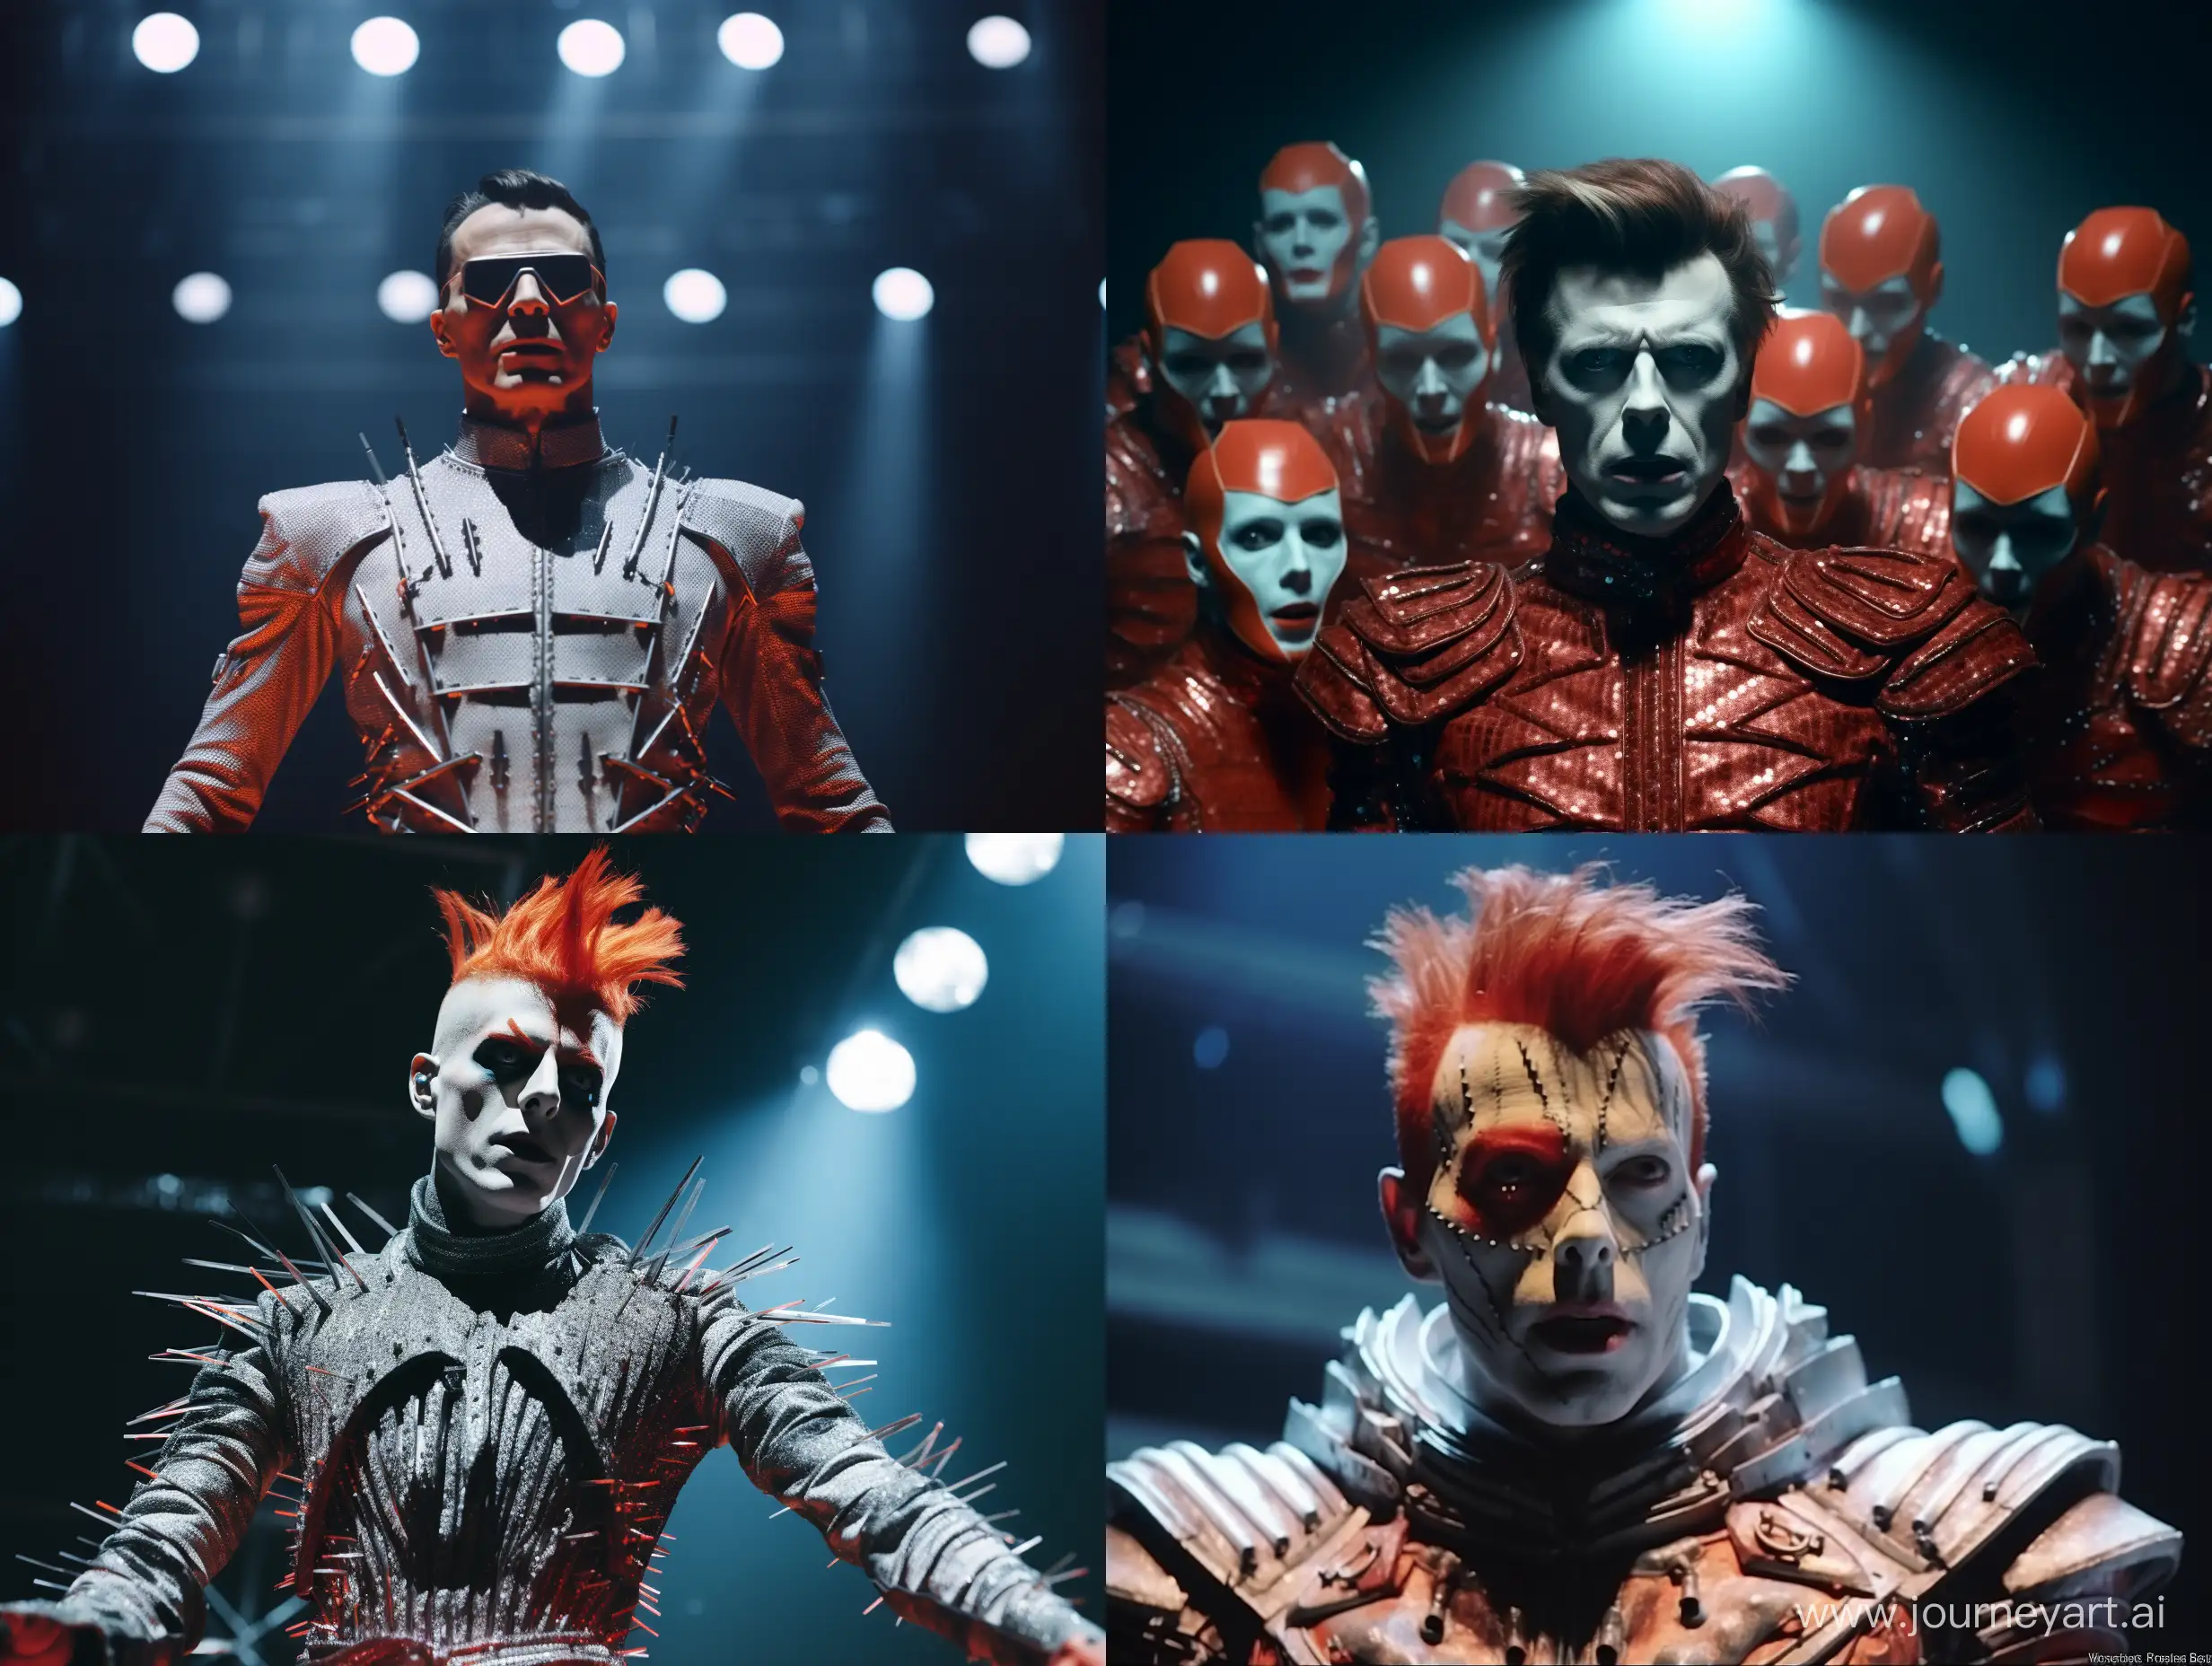 David-Bowie-and-Rammstein-Epic-Stage-Collaboration